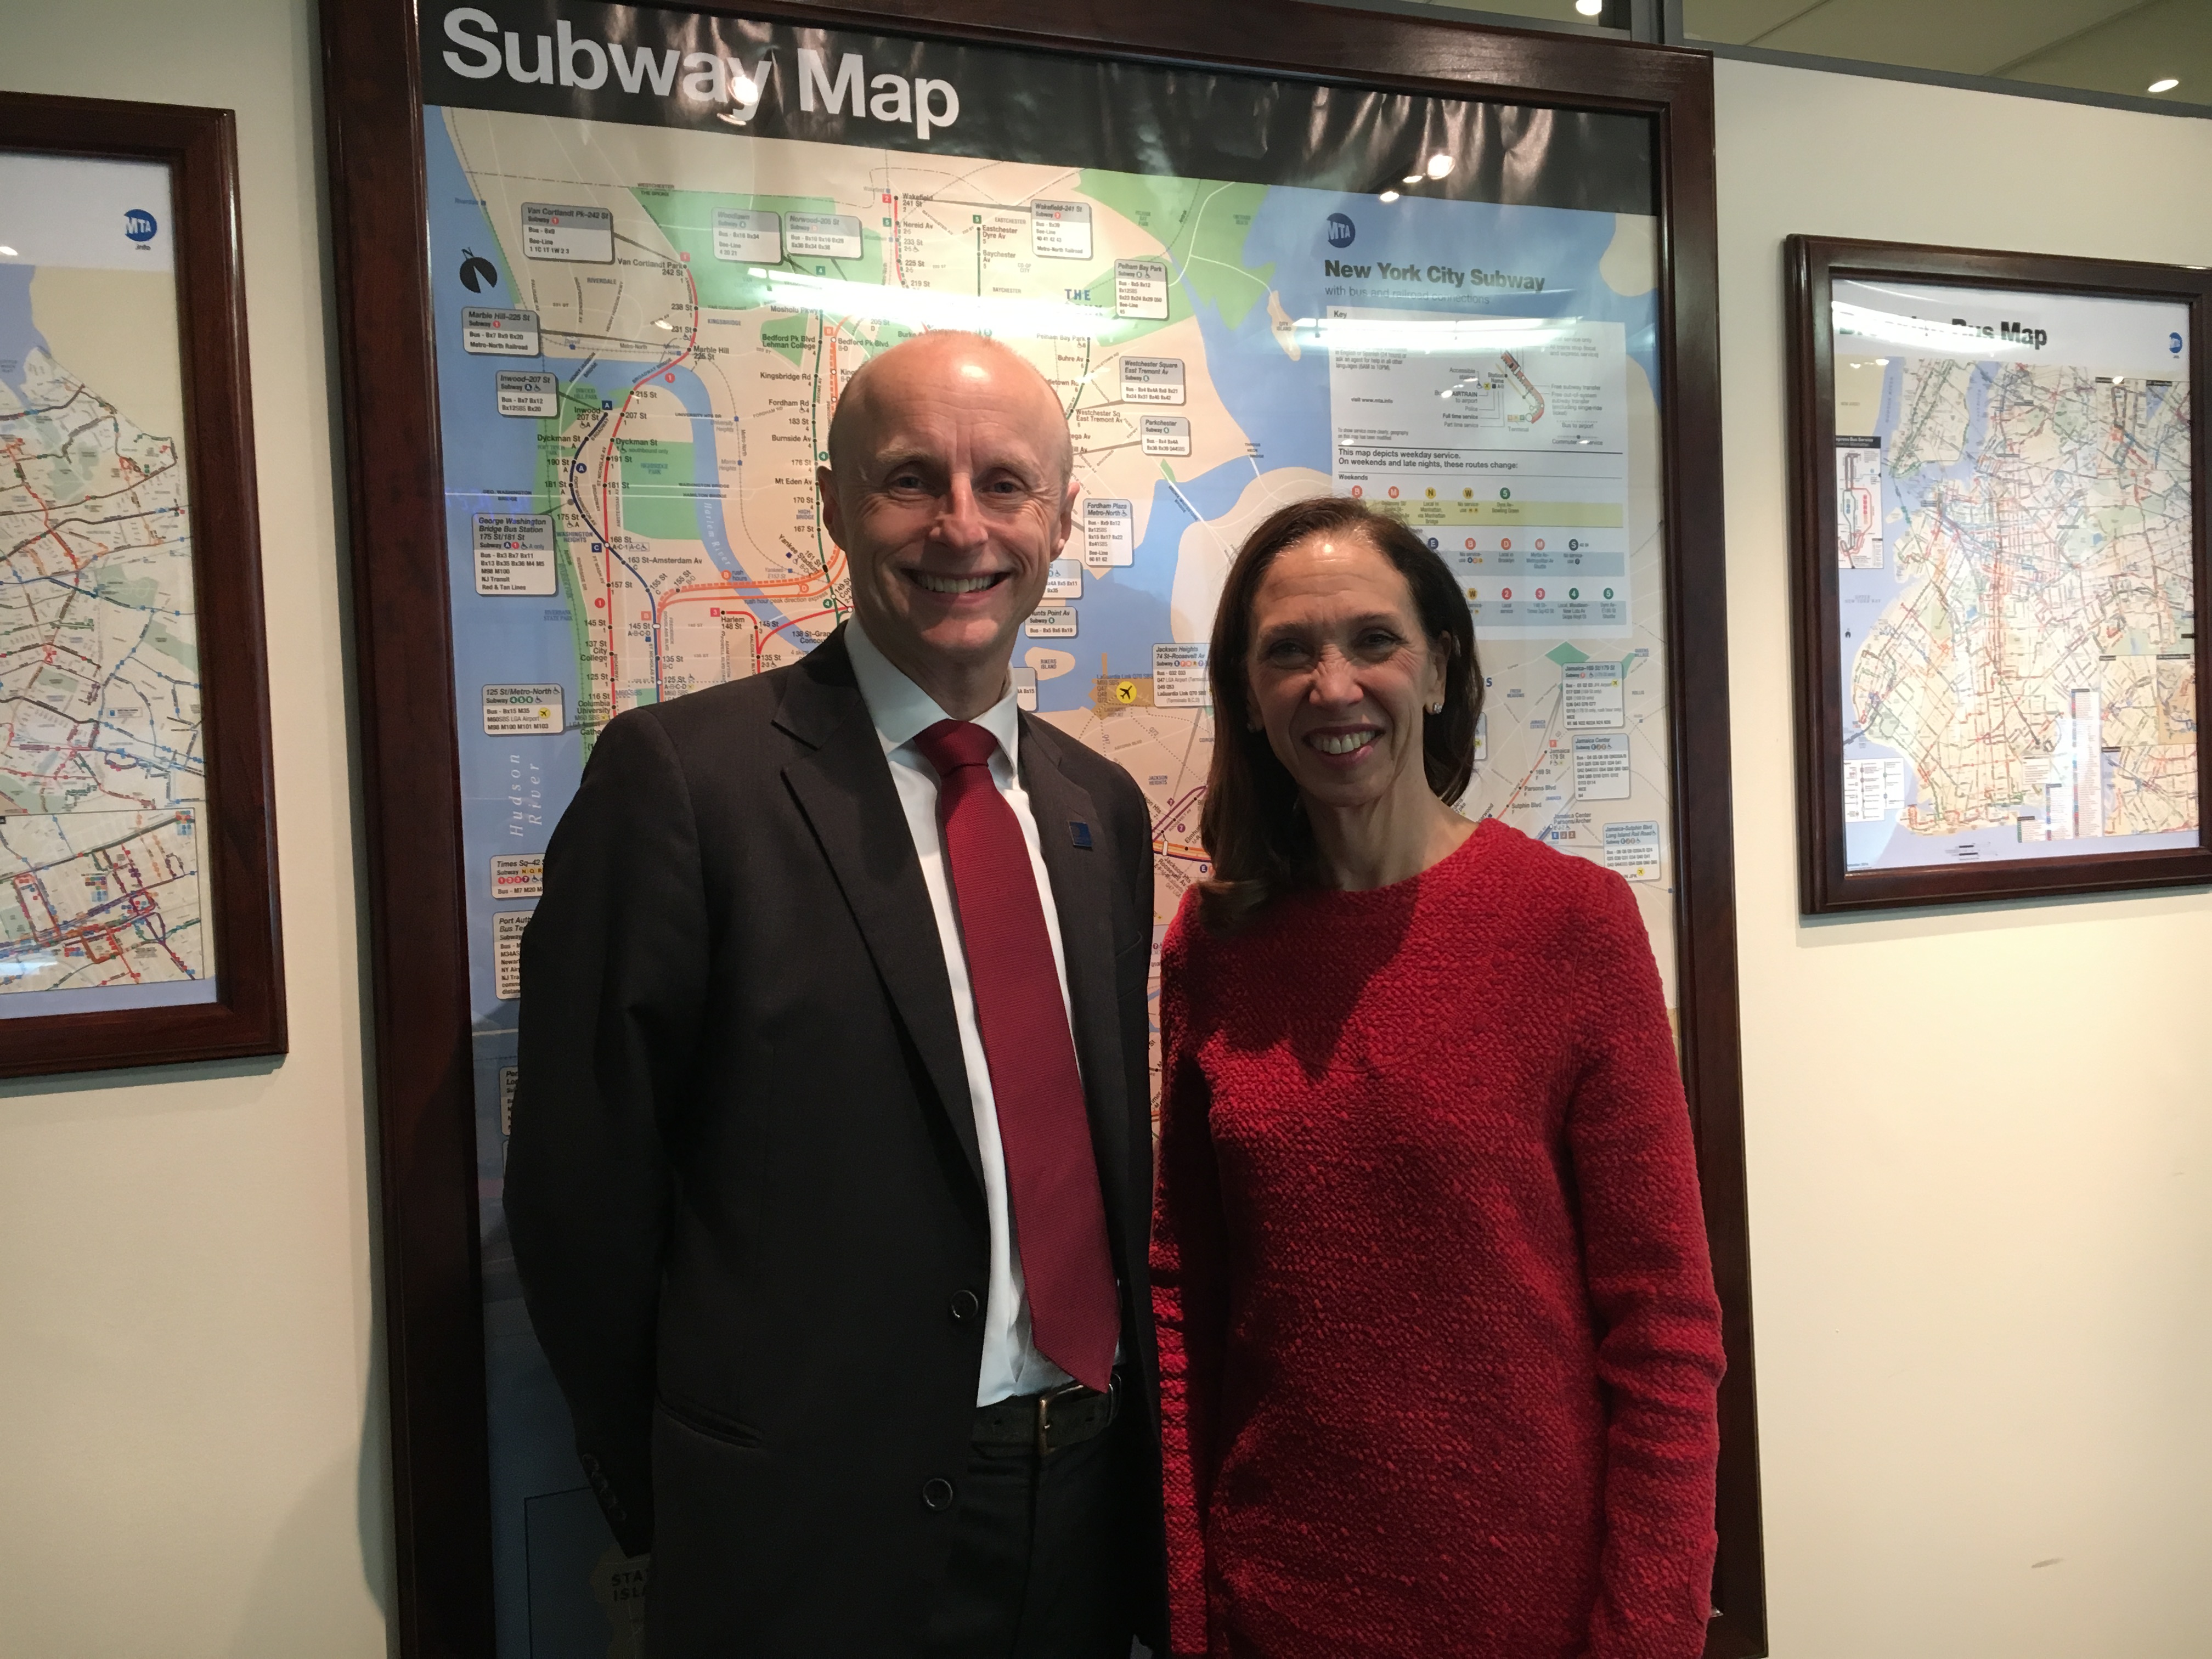 As Chair of the Committee on Corporations, Authorities, and Commissions, Assemblymember Amy Paulin met with NYC Transit Authority President Andy Byford to discuss the Subway's infrastructure and